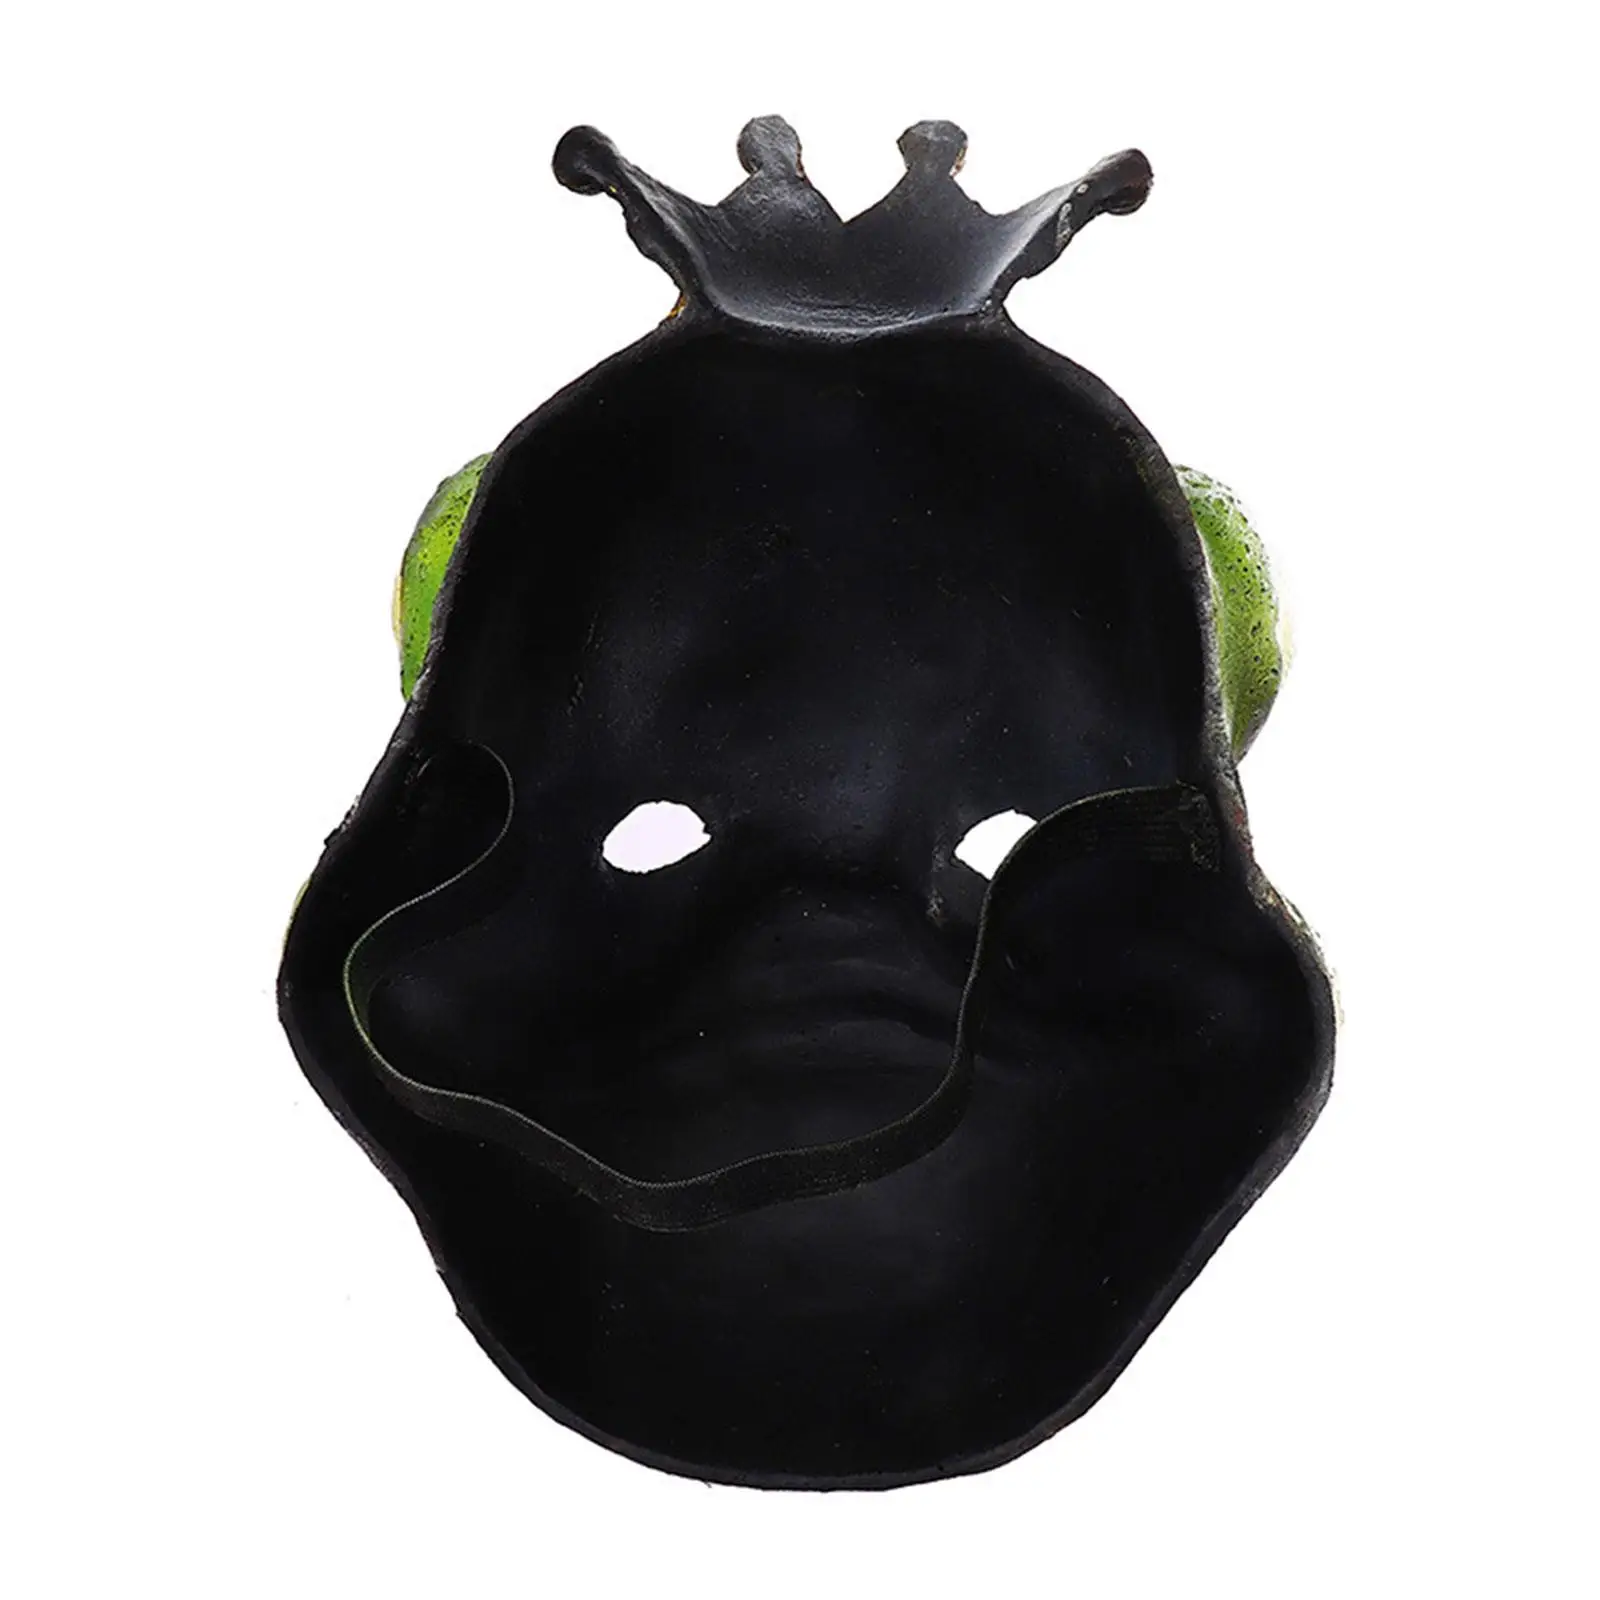 Frog Mask Cosplay Costume Props Headgear Adults Novelty Masquerade Mask Animal Mask for Festival Prom Night Club Party Halloween